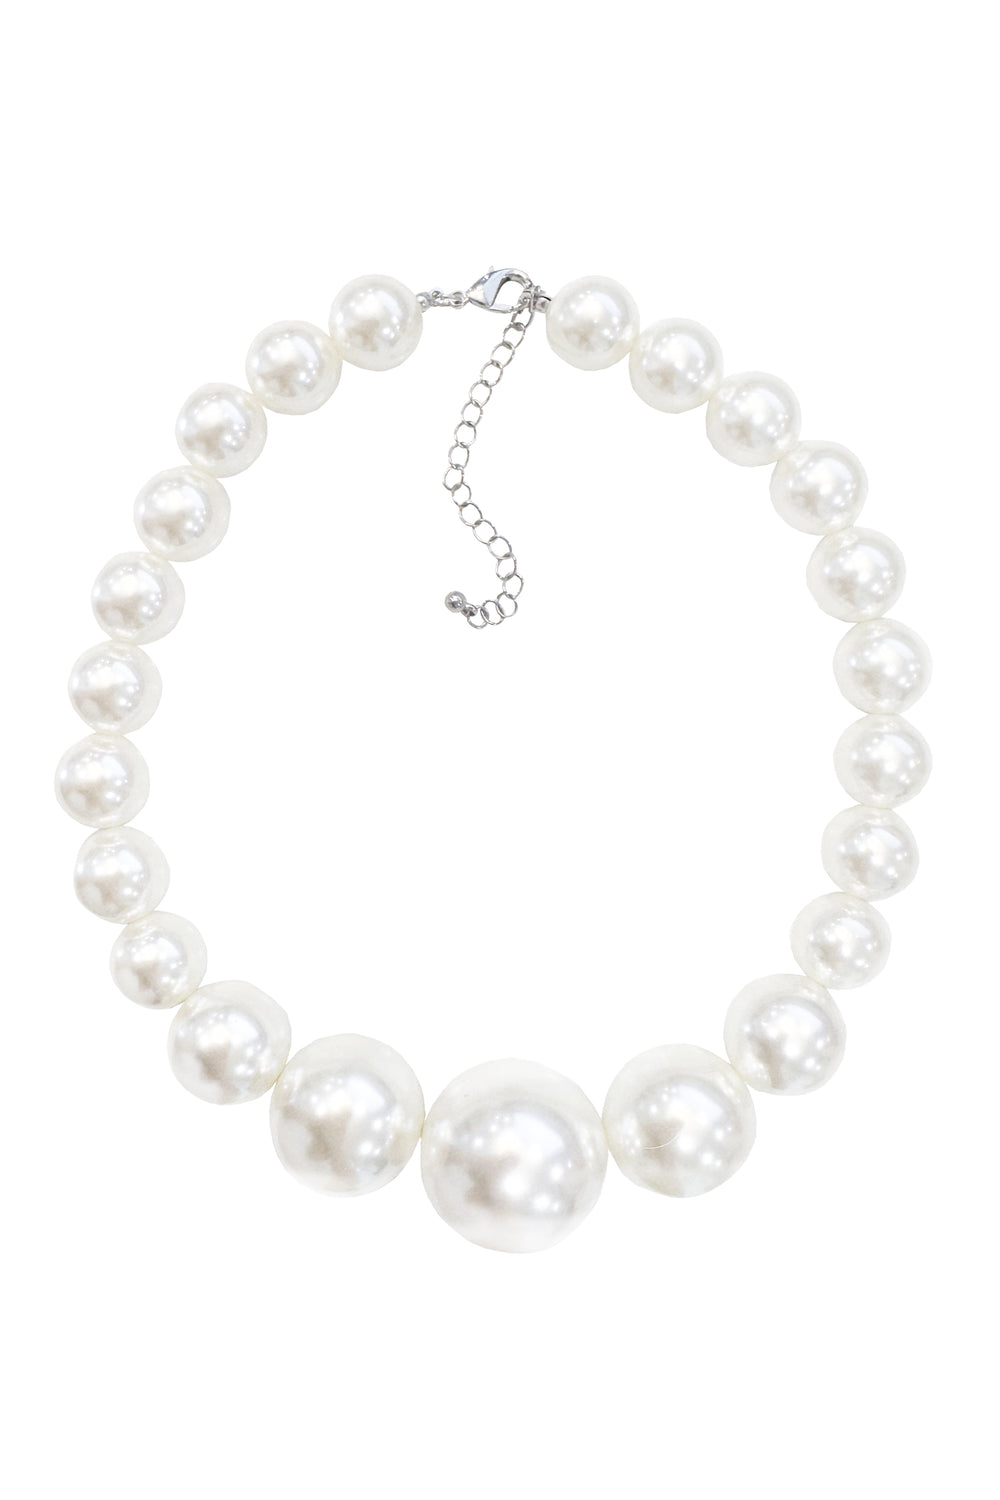 Ginvra Pearl Necklace